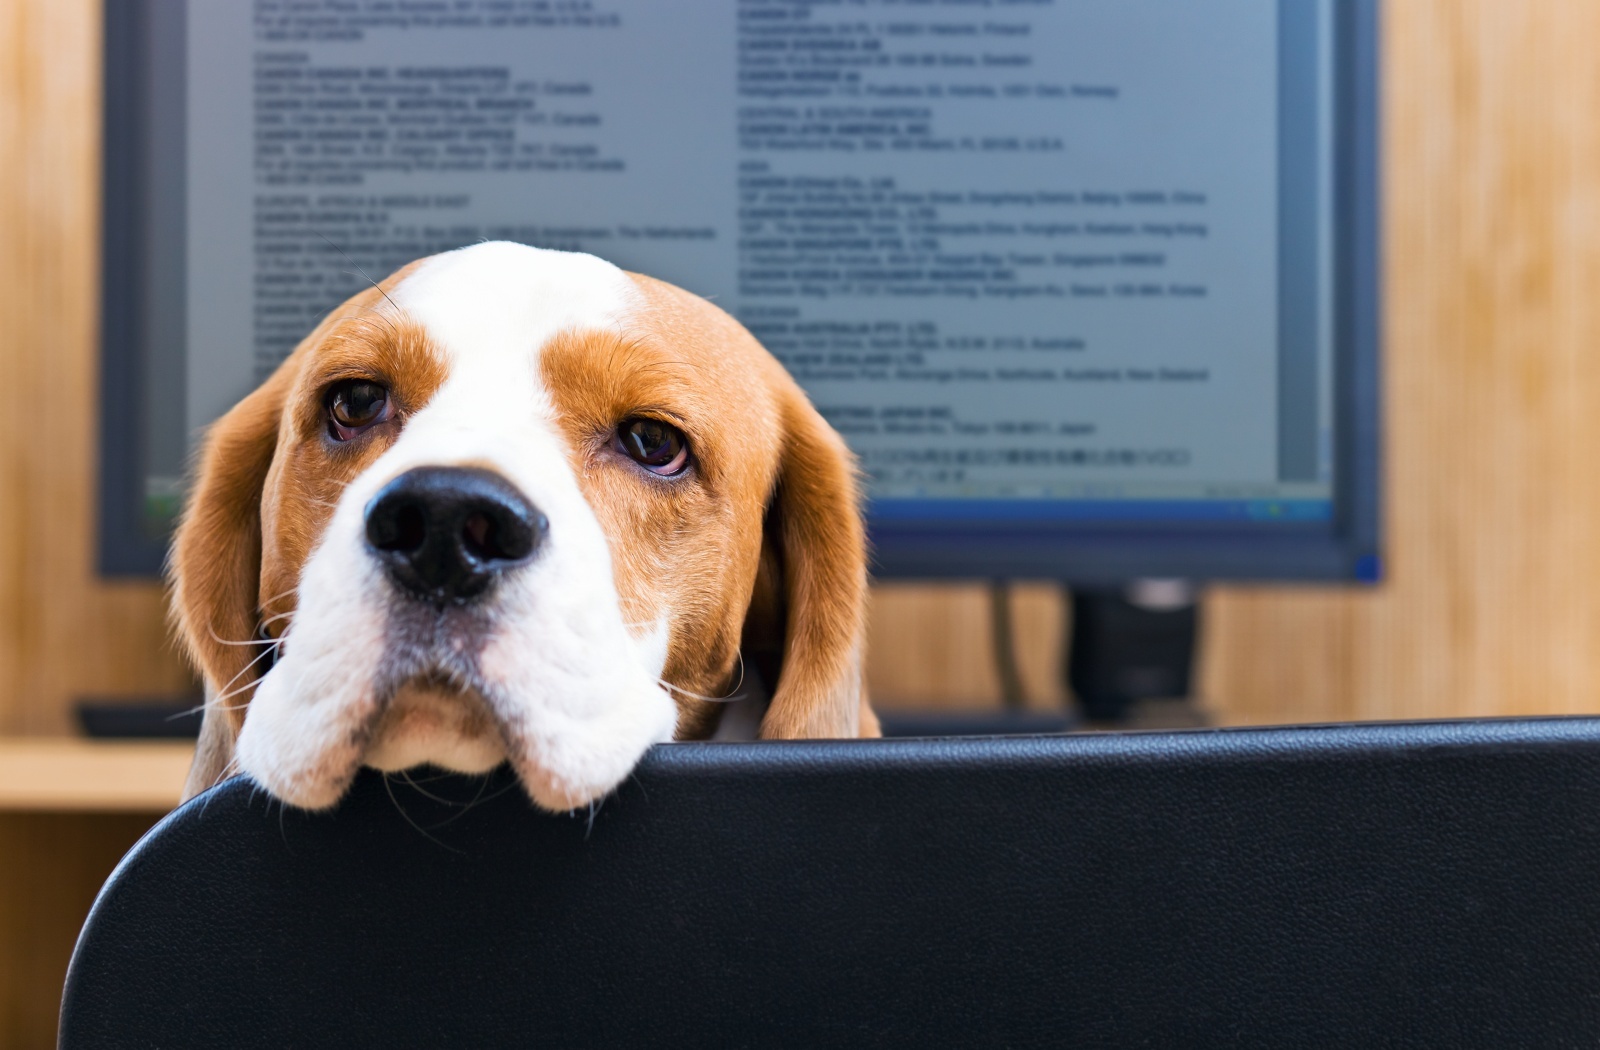 endeavorlegal-dogs-in-office